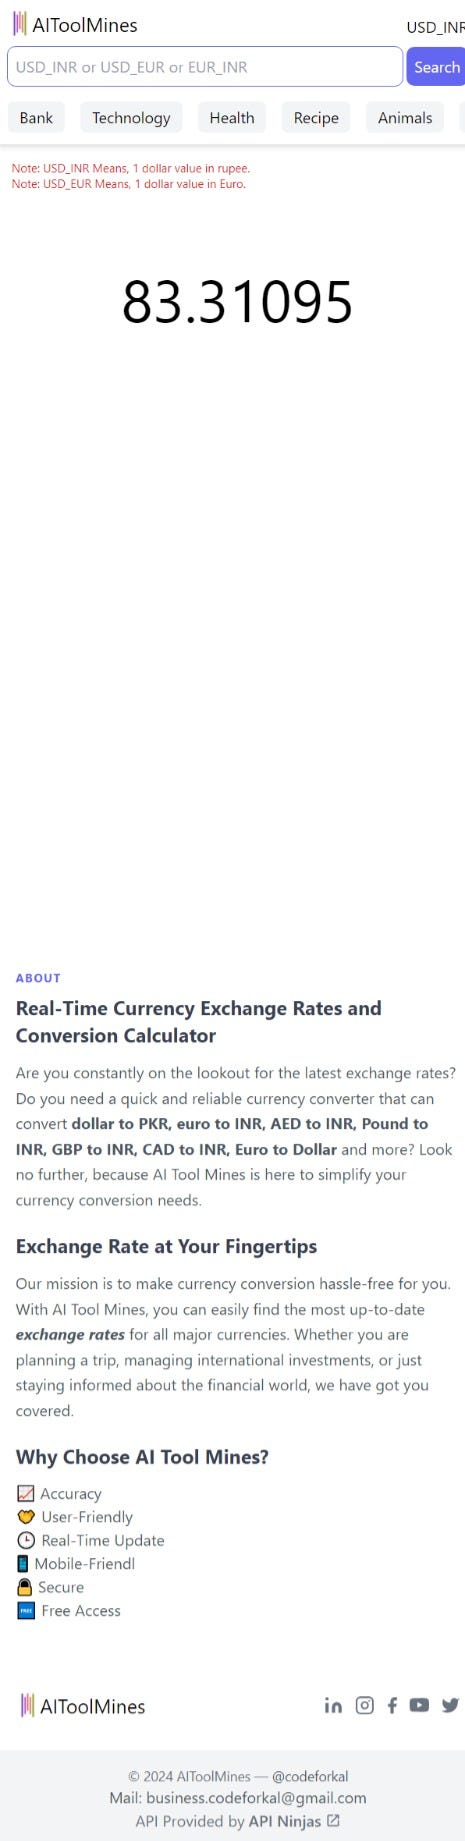 Real-Time Currency Exchange Rates and Conversion Calculator - Siddhant Mani  - Medium